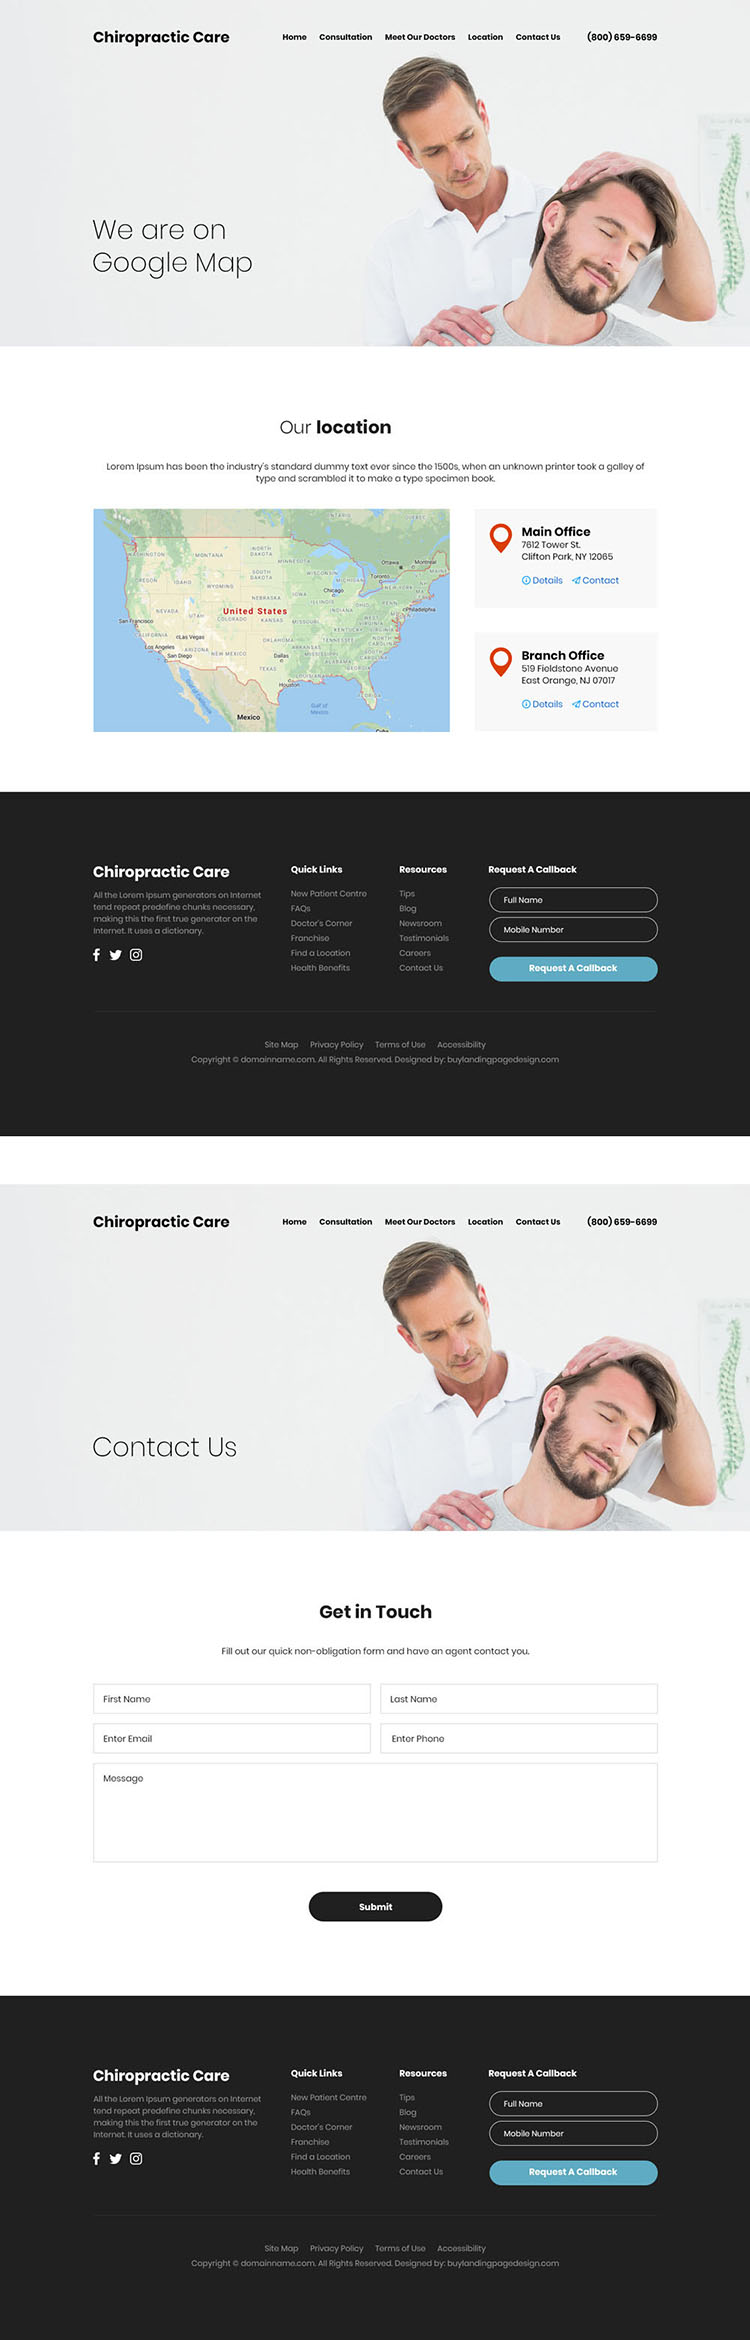 affordable chiropractic care responsive website design